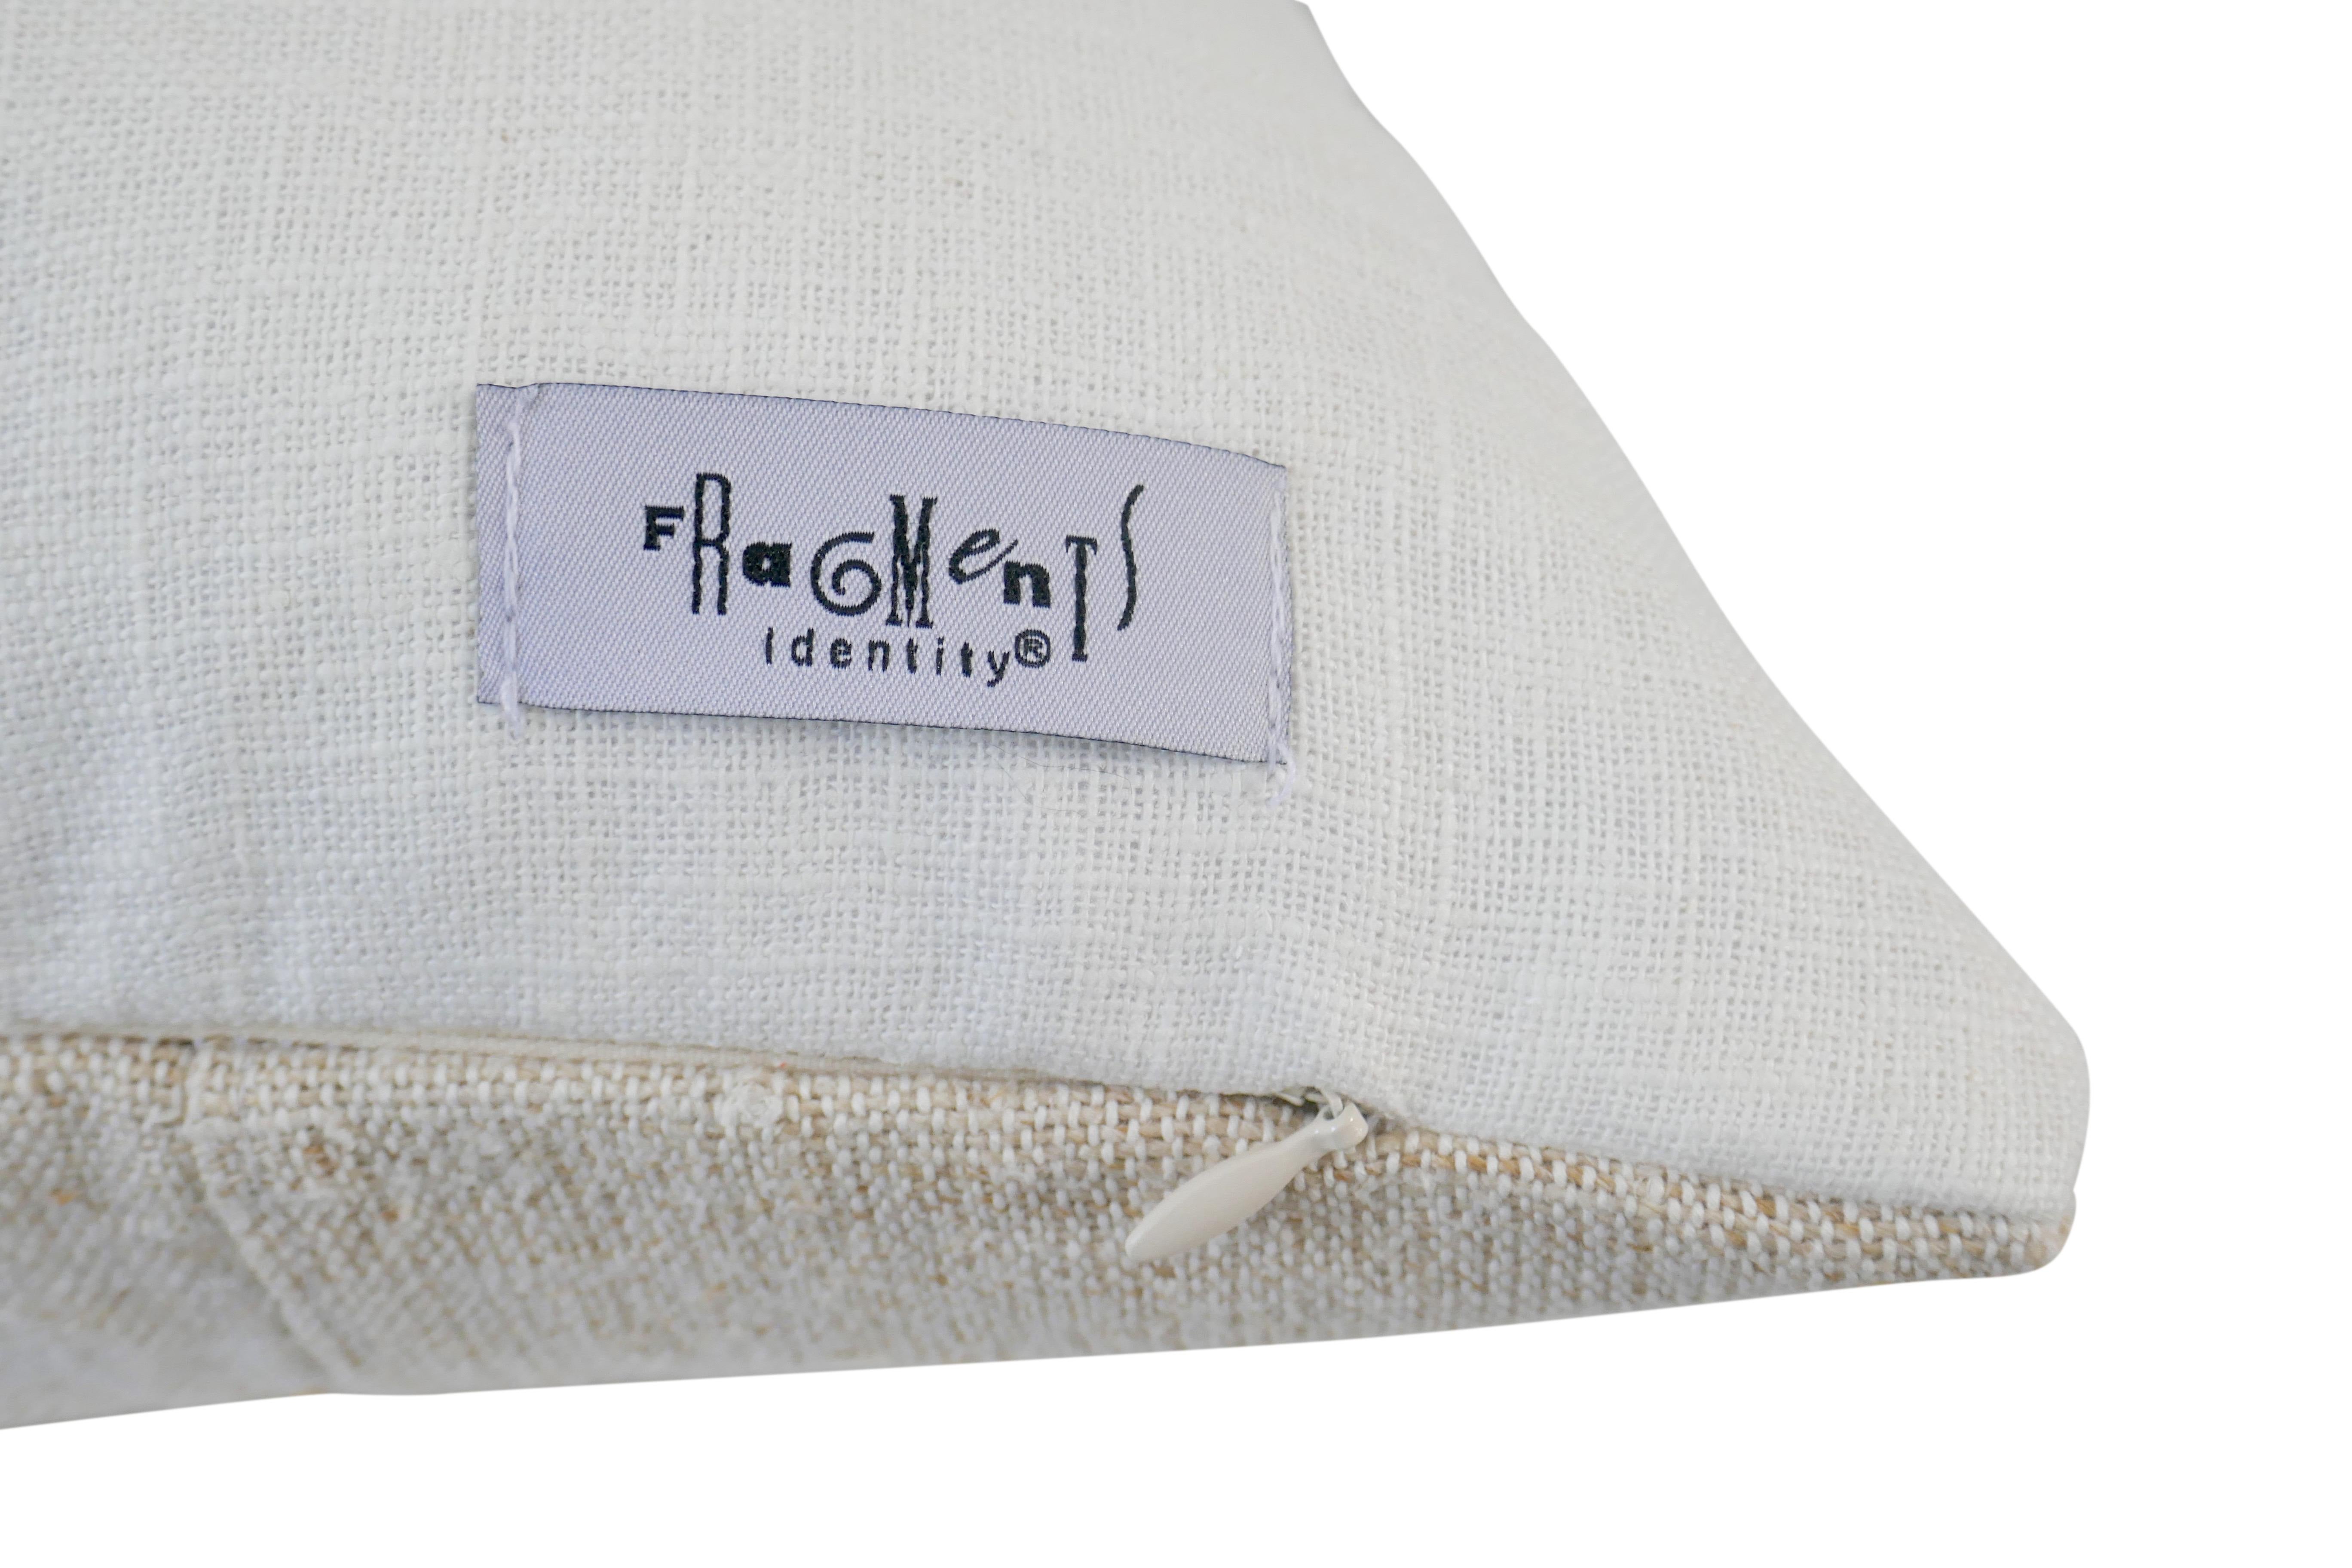 Linen Fragments Identity Italian Loomed Raw Rolled Silk Pillow For Sale